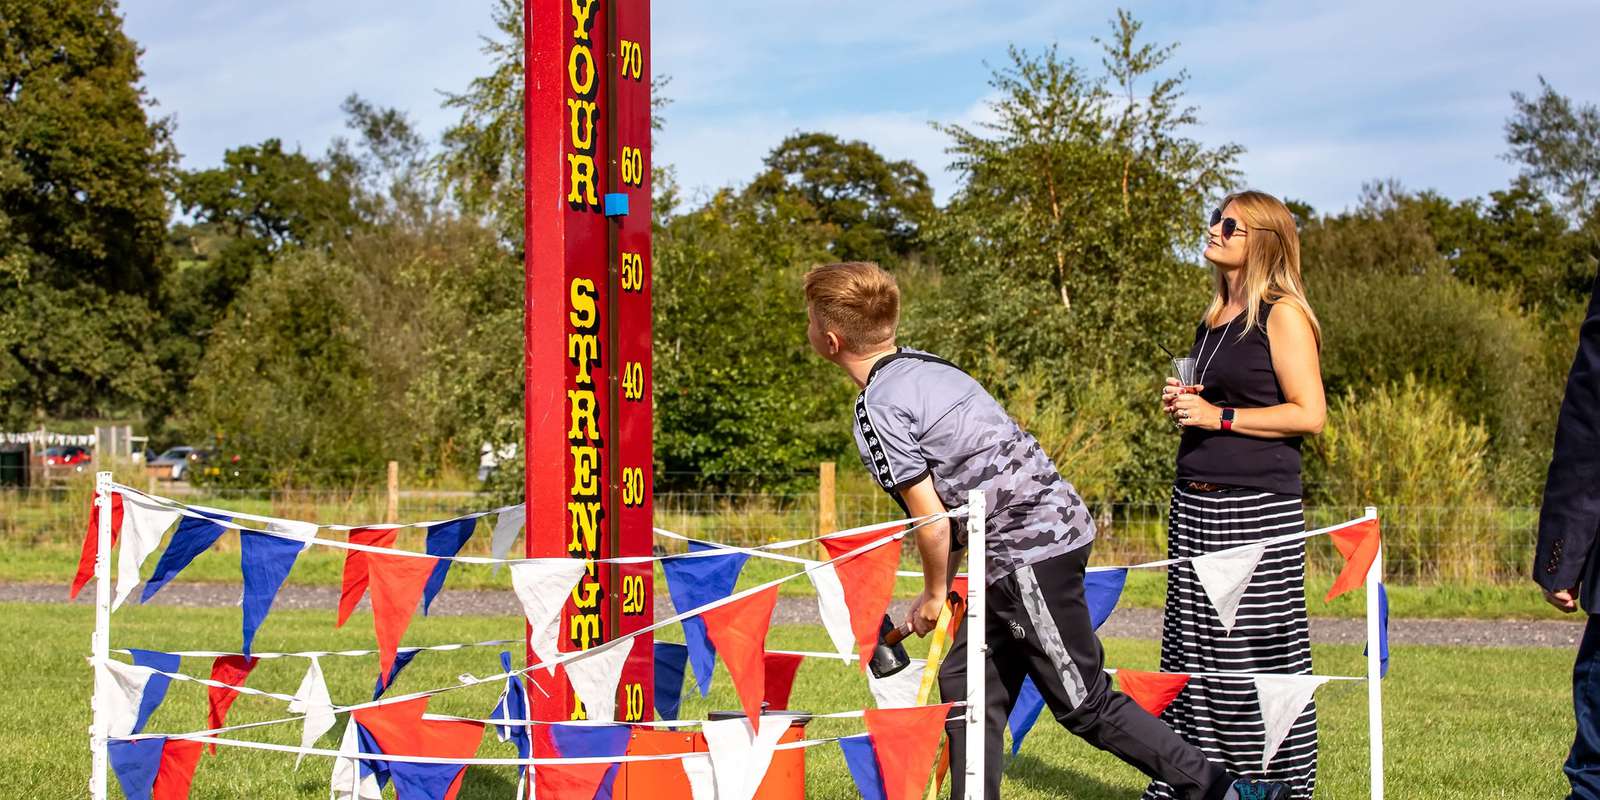 Test your strength Outdoor venue games for corporate family fun days